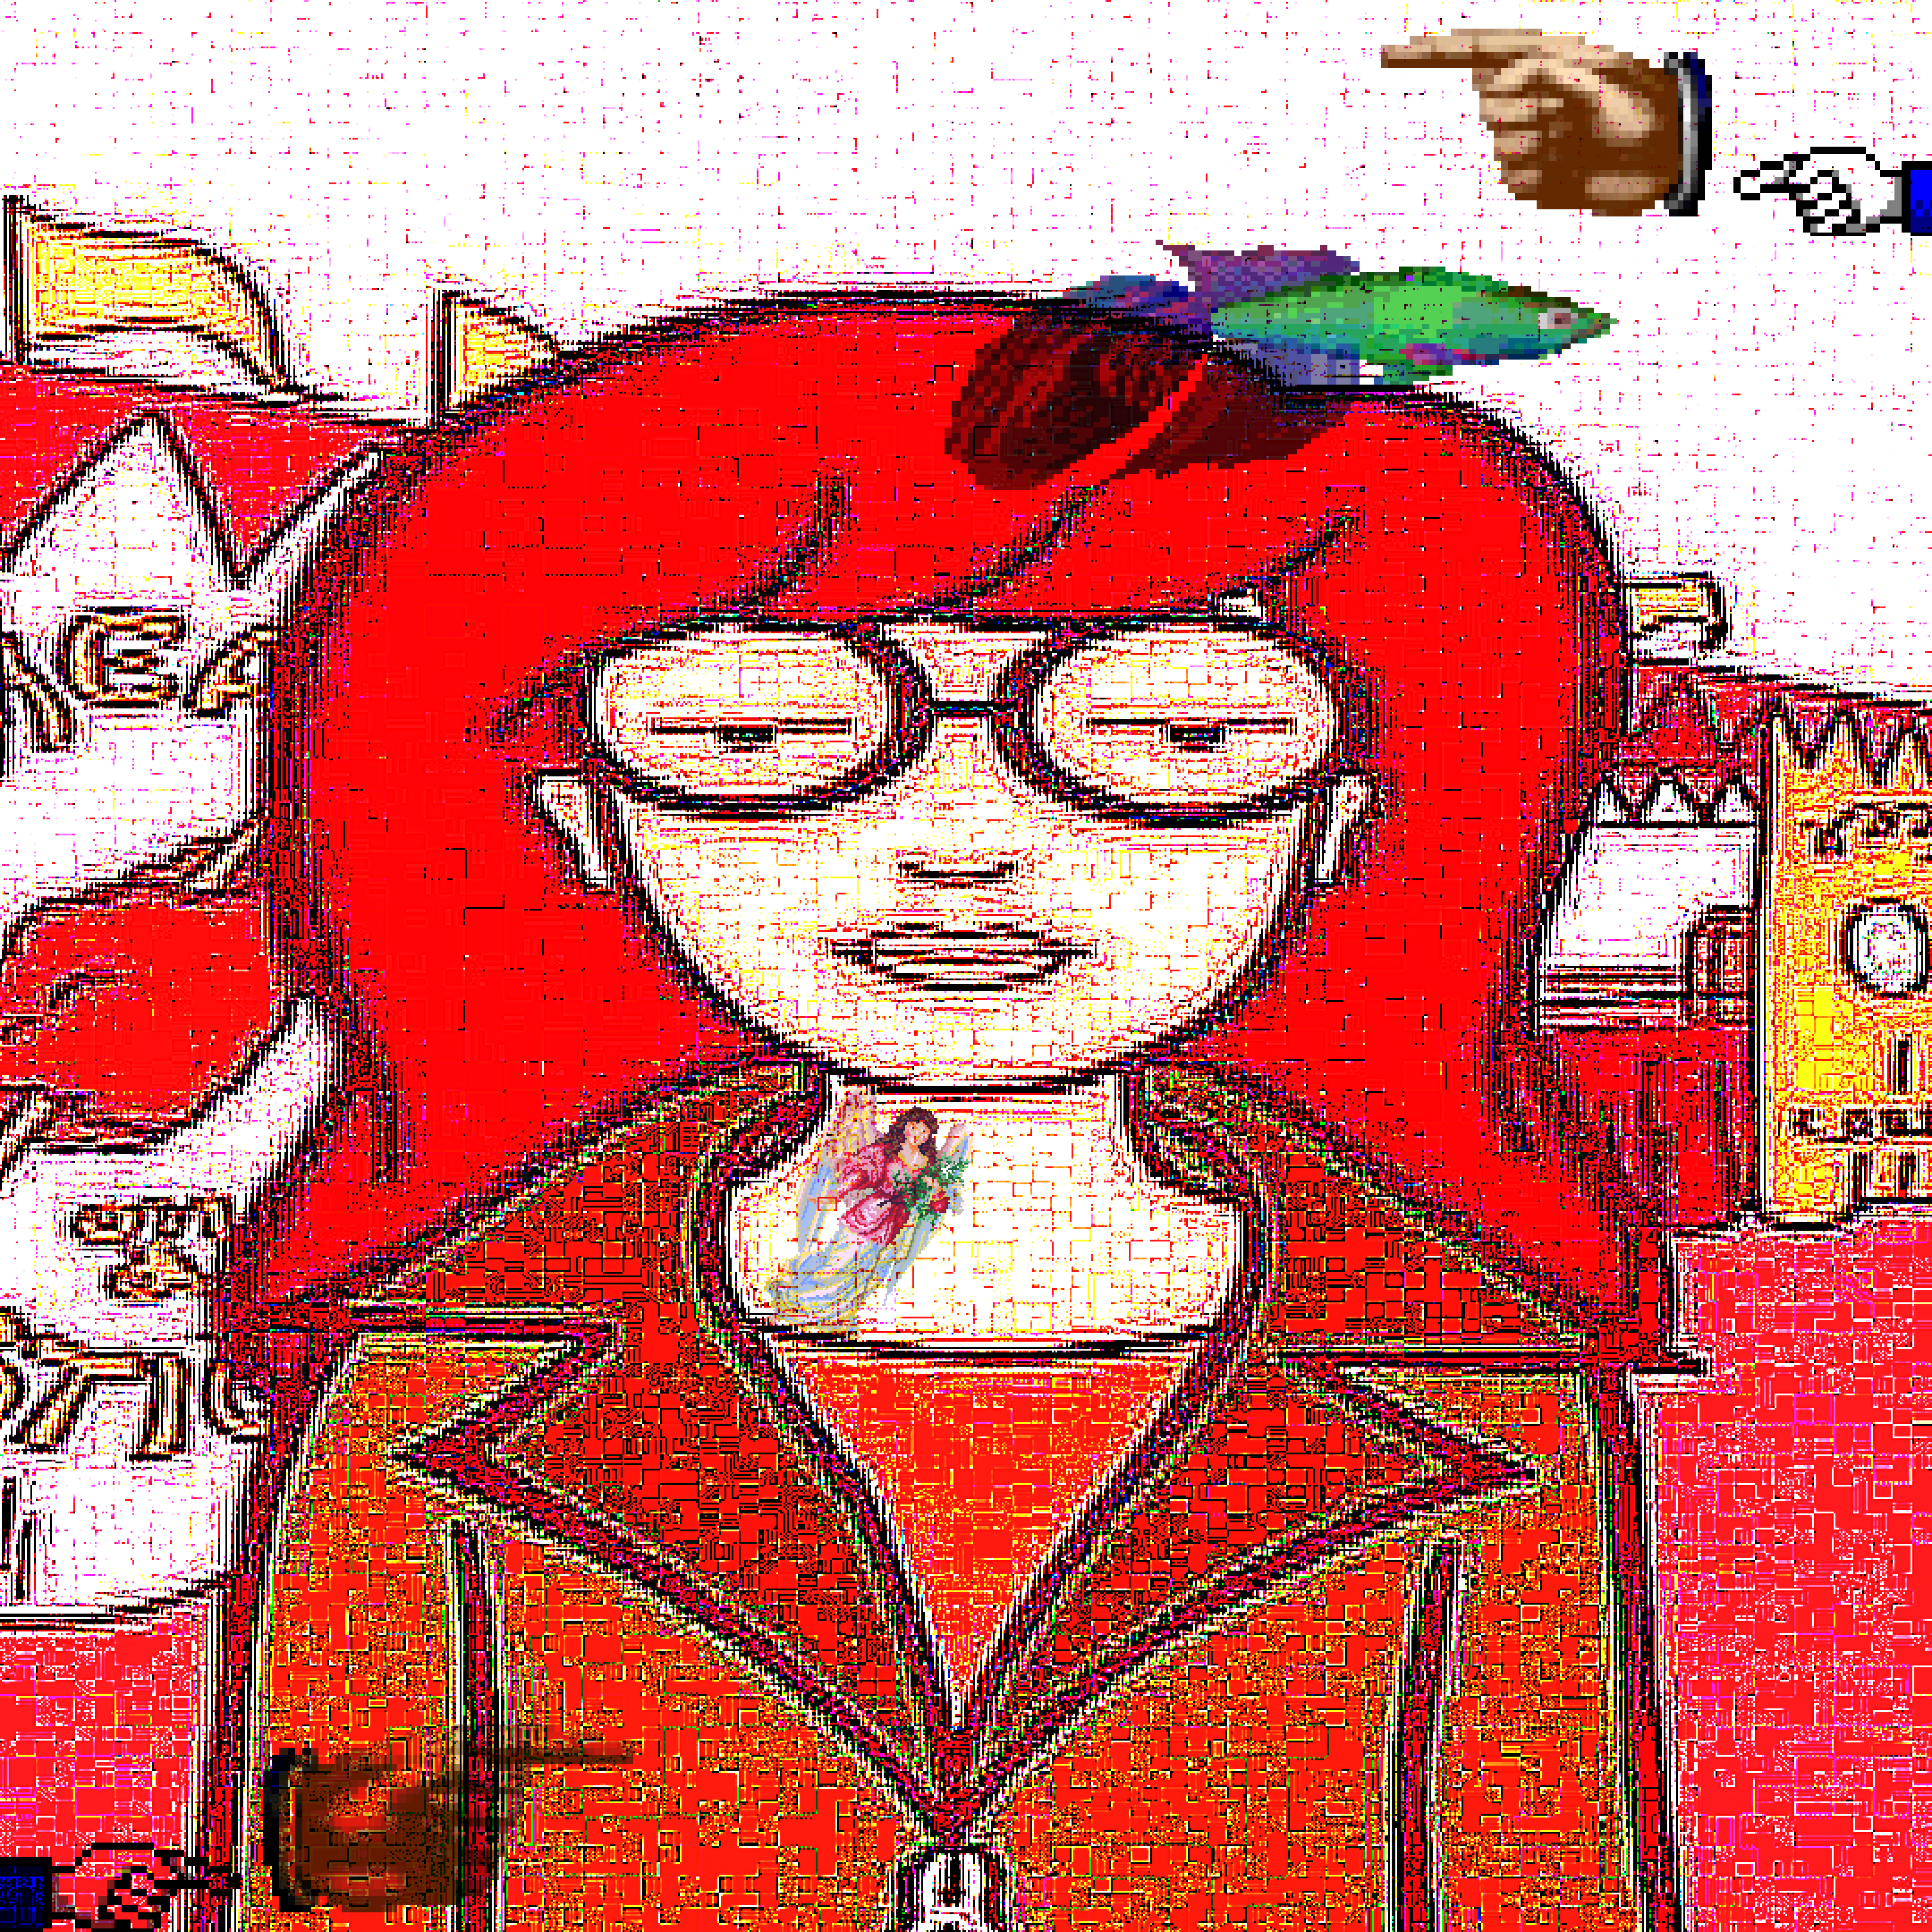 Distorted image of Daria being serious